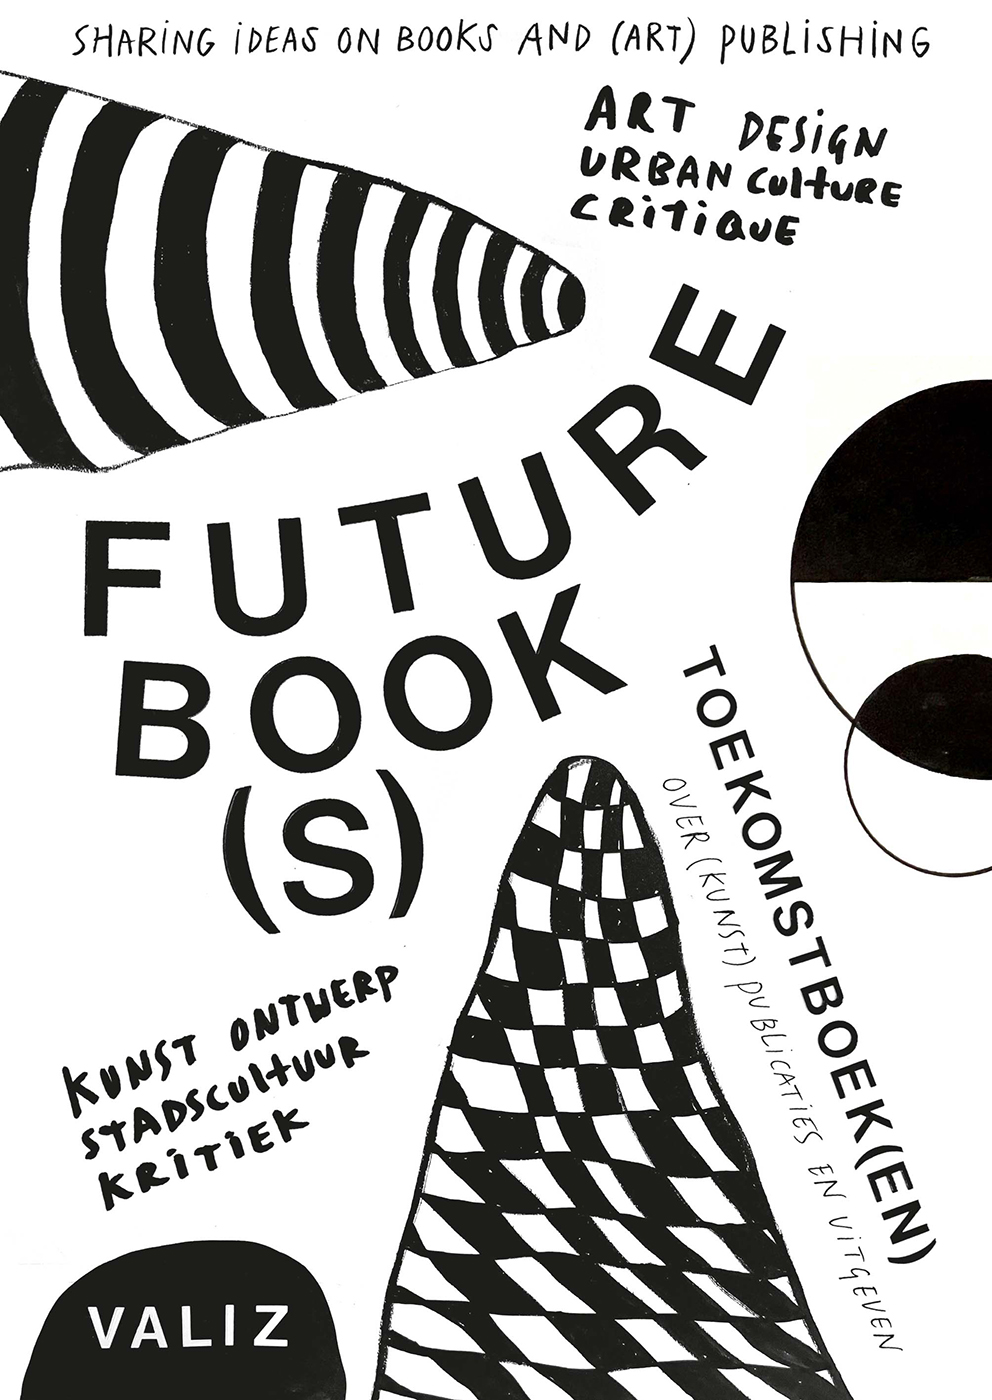 Future Book(s)—Sharing Ideas on Books and (Art) Publishing